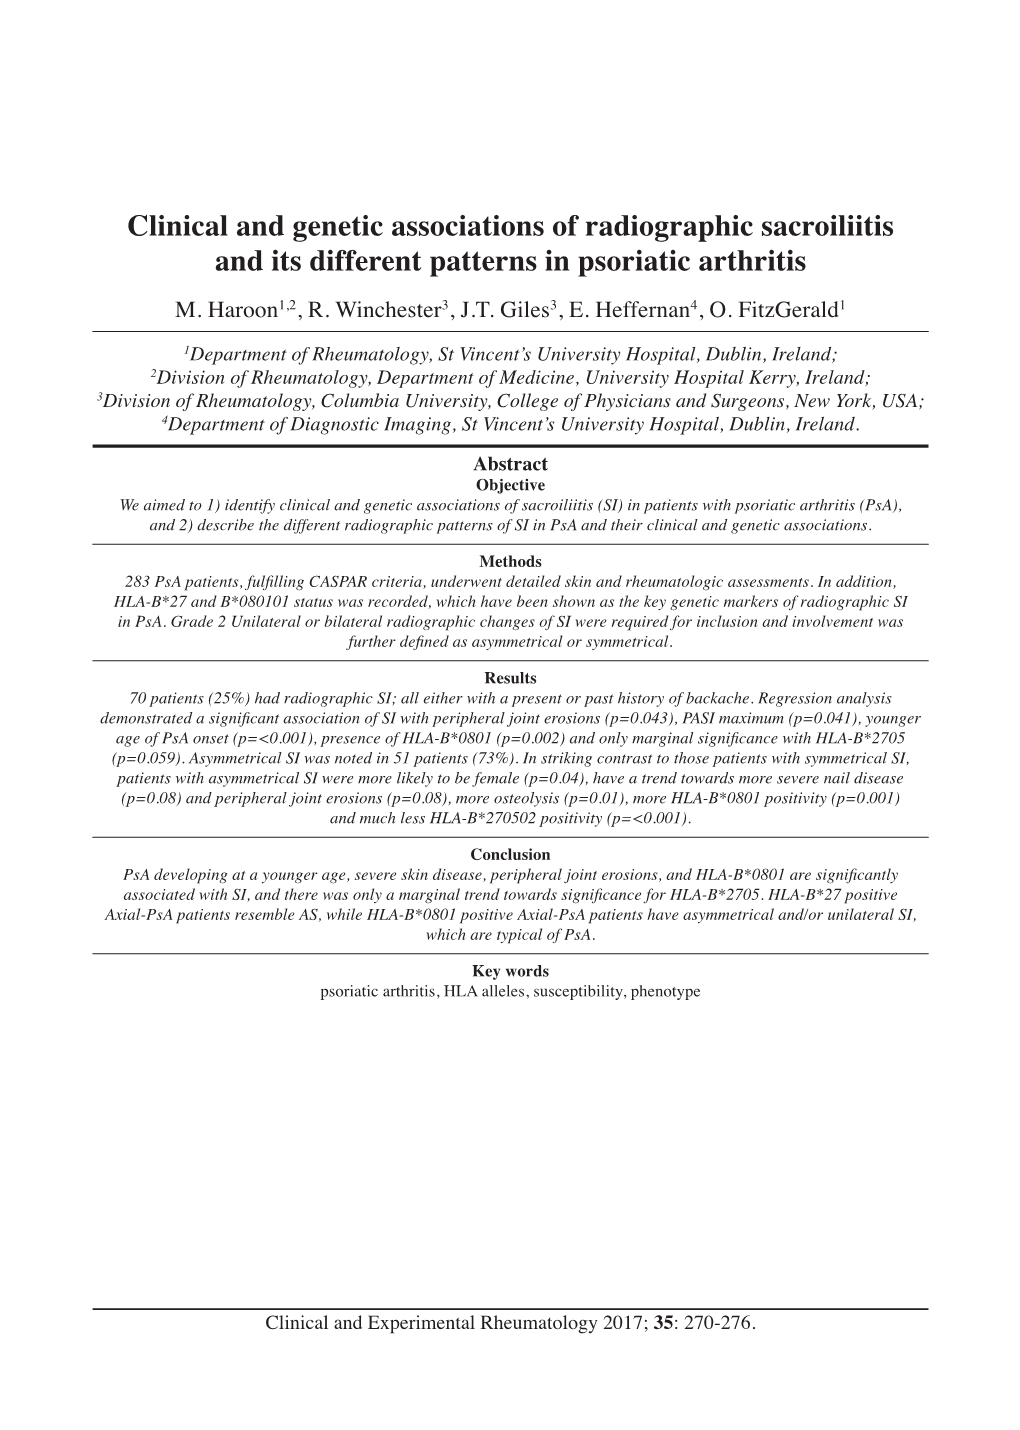 Clinical and Genetic Associations of Radiographic Sacroiliitis and Its Different Patterns in Psoriatic Arthritis M